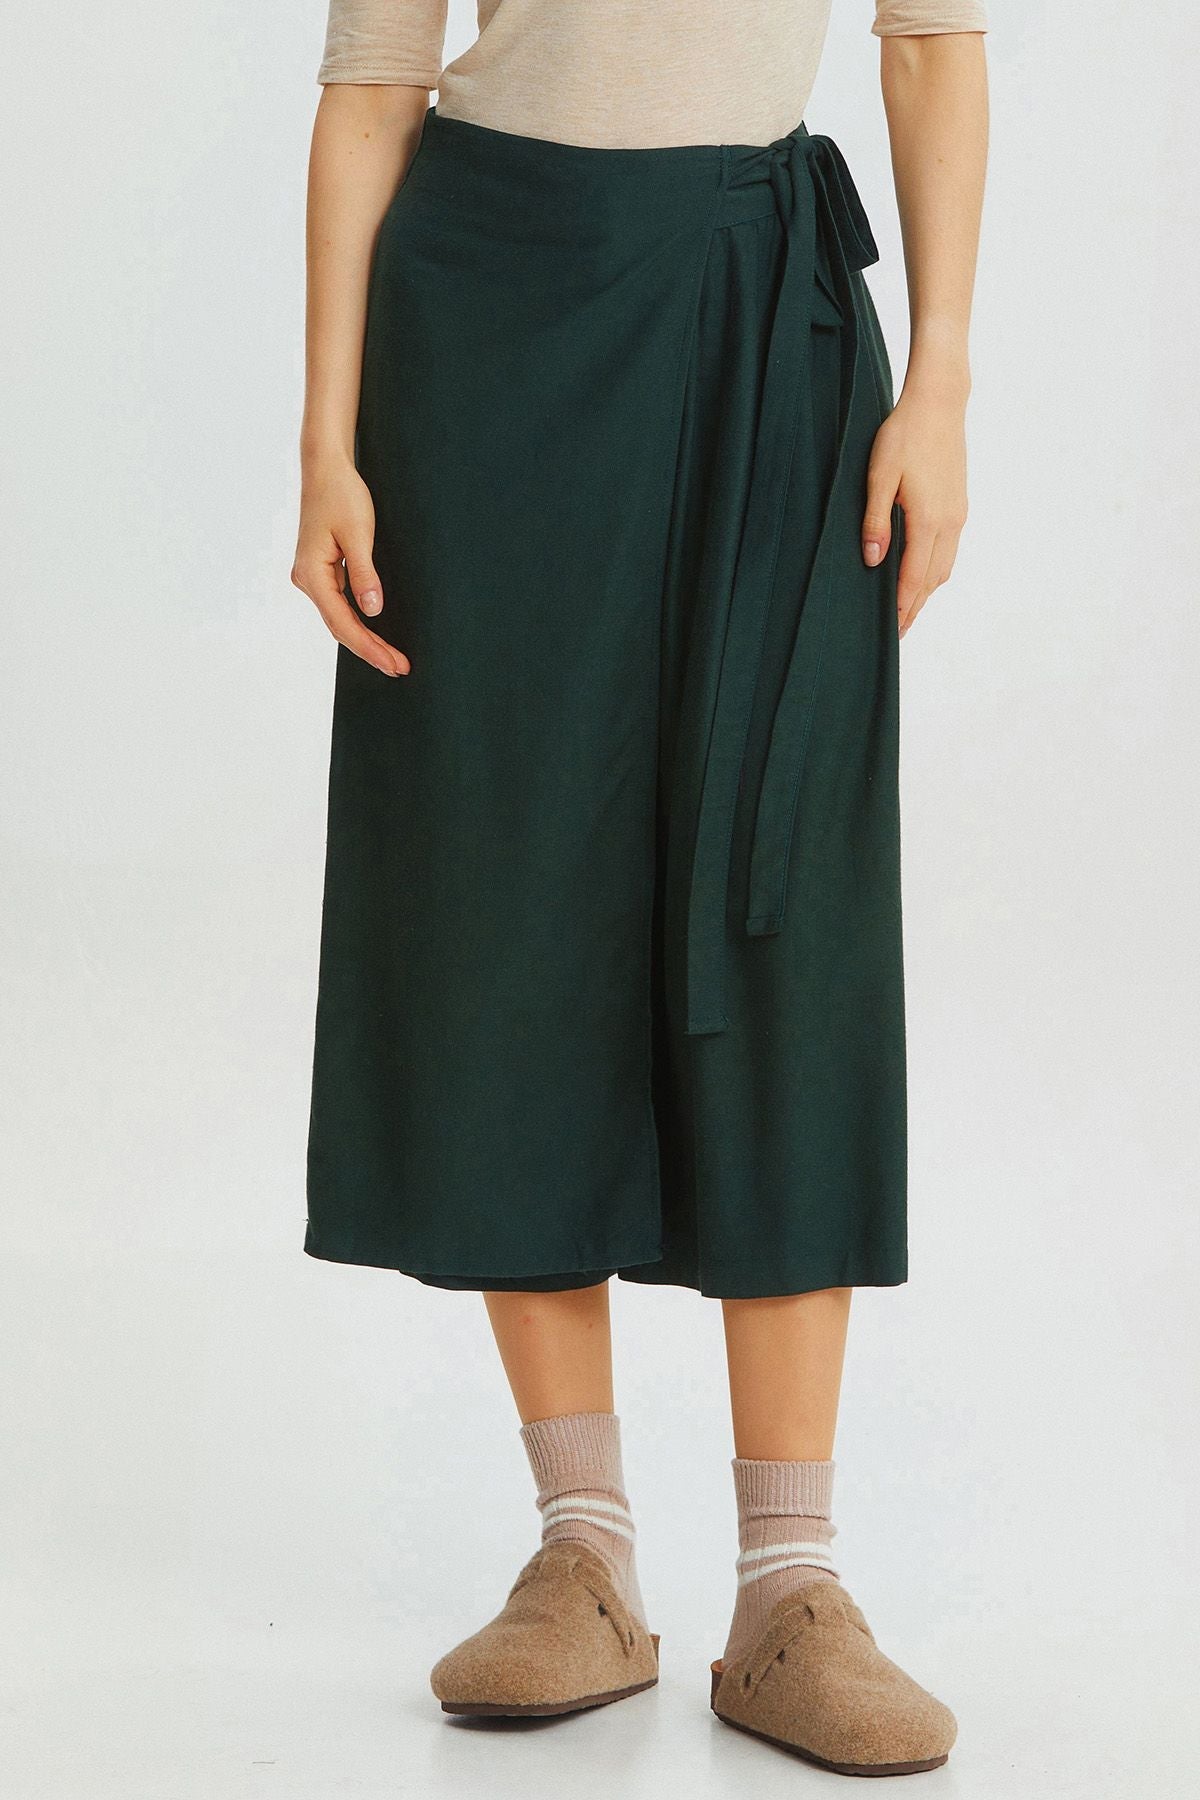 Solid Color Skirted Pants Green